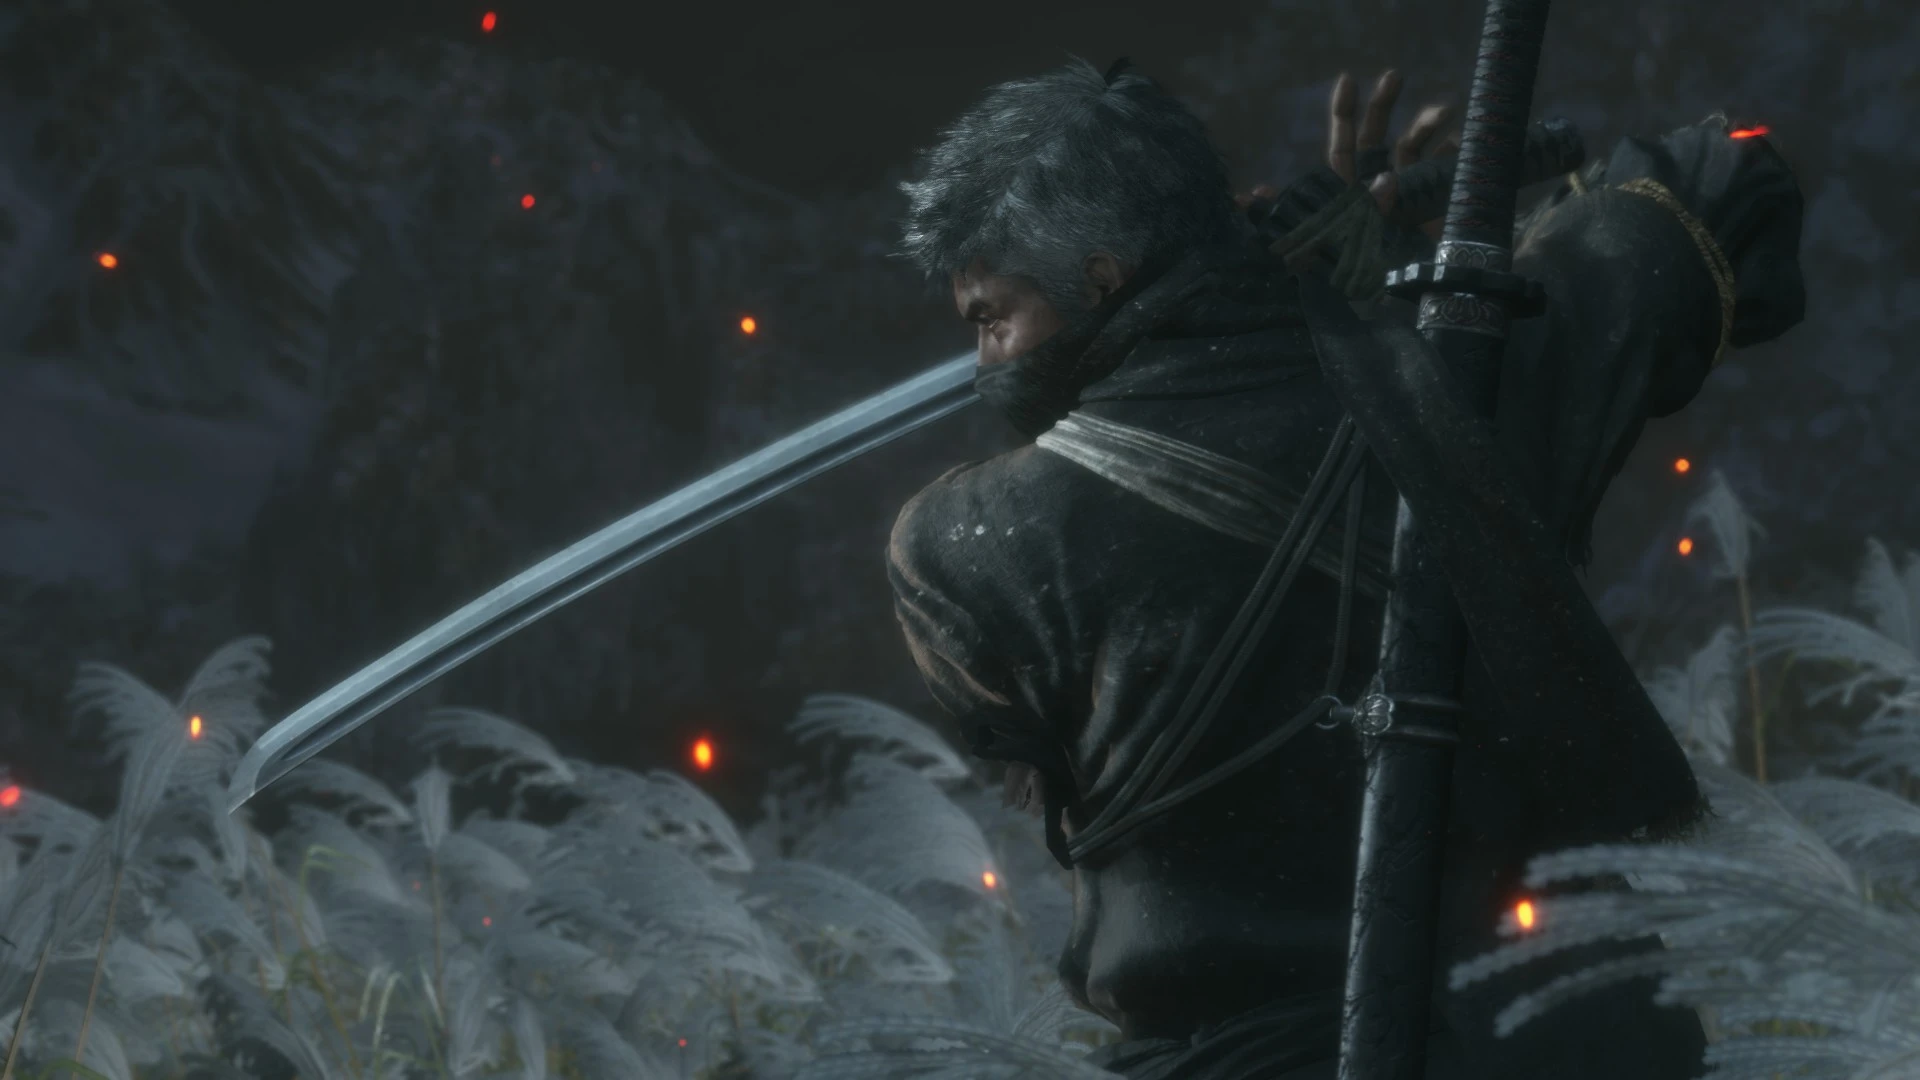 Sekiro Shadows Die Twice Goty Trailer Free Update For All Current Owners Update New Screens Info And Boss Changes News Resetera